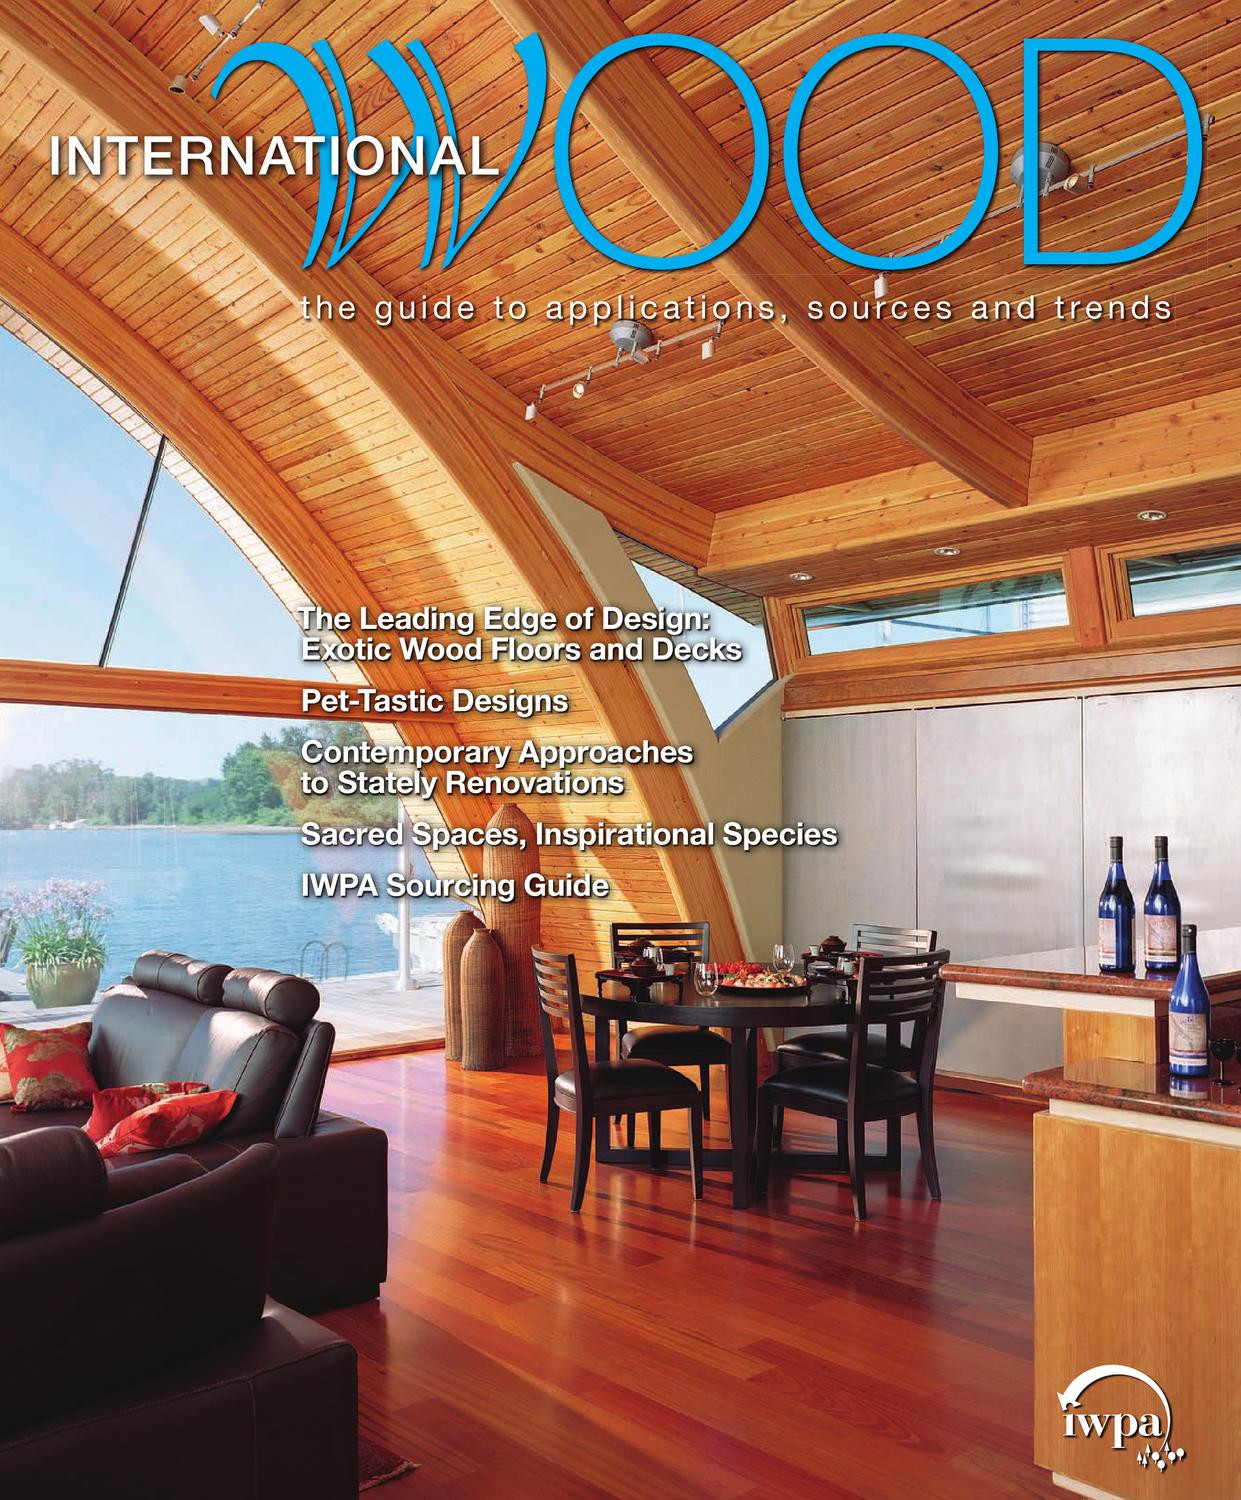 30 Awesome Hardwood Floor Refinishing Fairfield Ct 2024 free download hardwood floor refinishing fairfield ct of international wood magazine 09 by bedford falls communications issuu in page 1